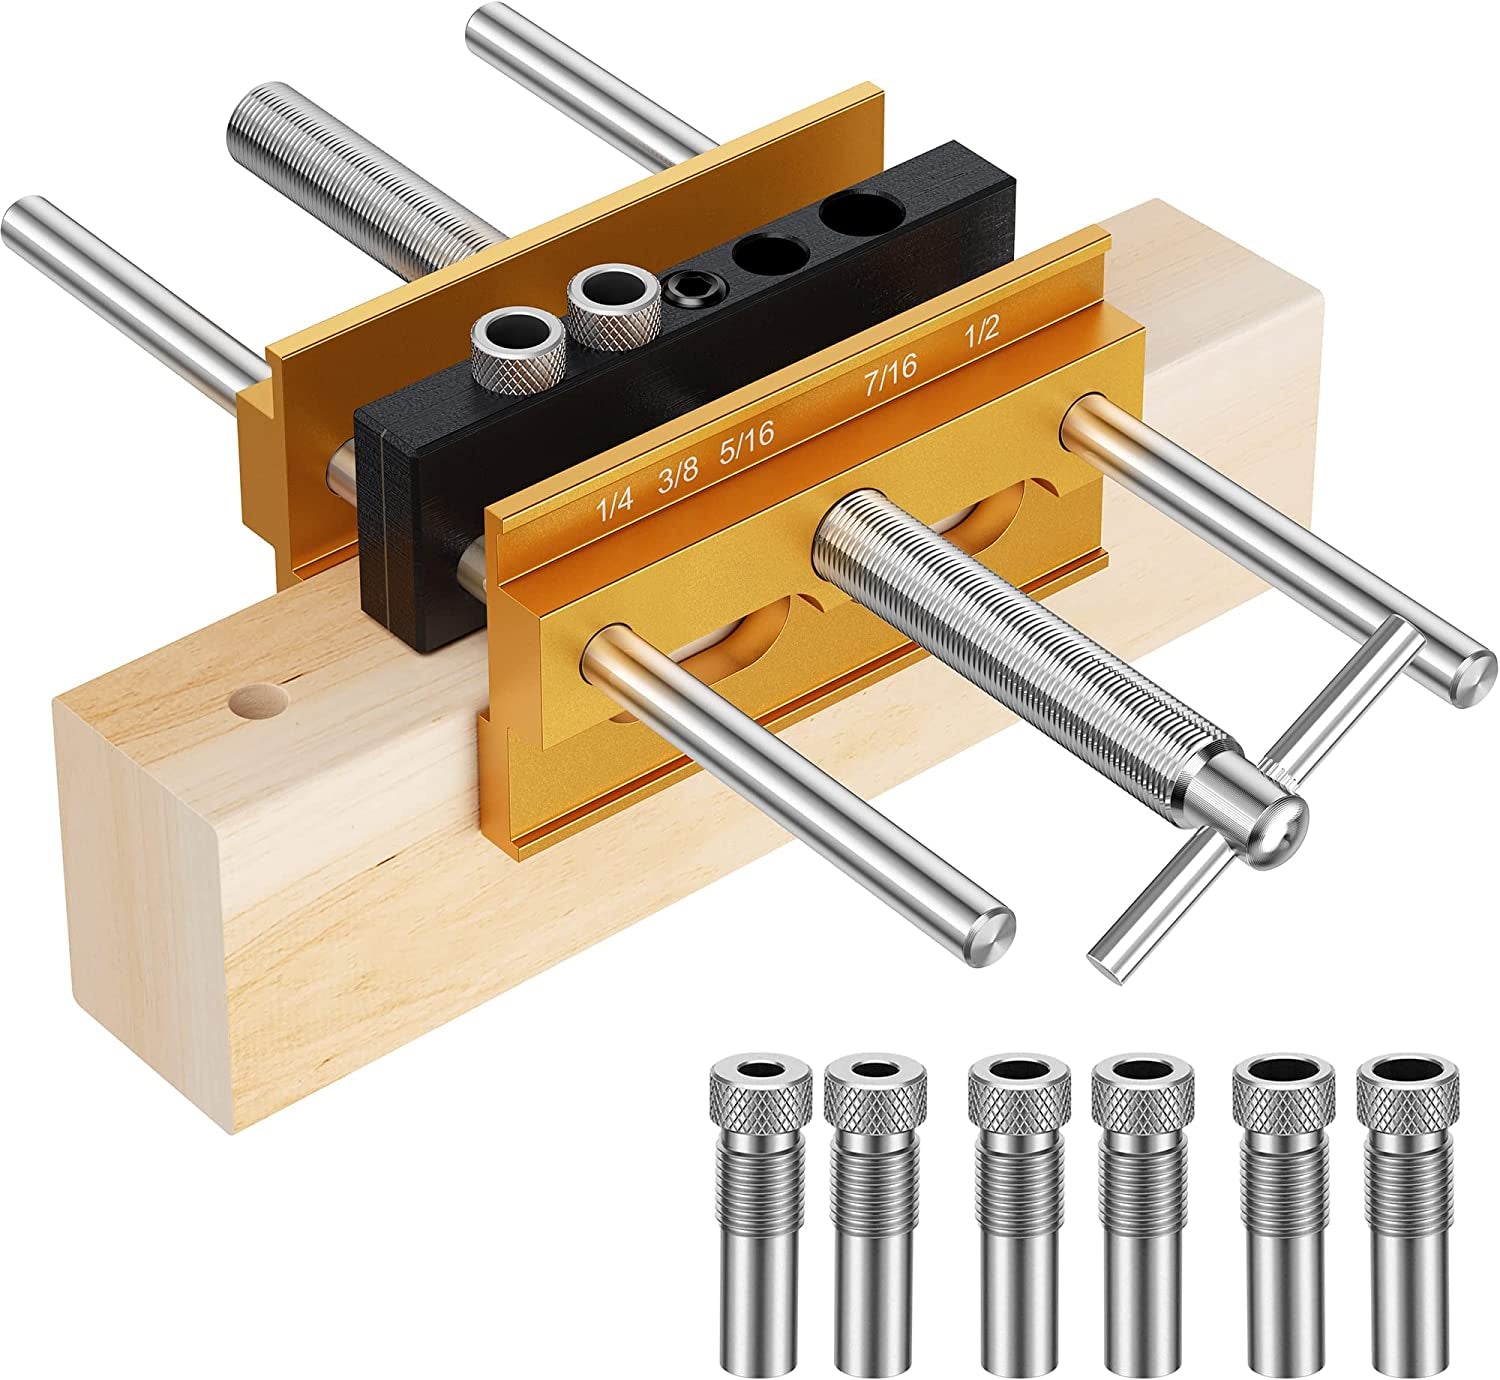 Kolvoii , Dowel Jig for Straight Holes, Adjustable Width Woodworking Locator Joints Set with 3 Size Titanium Coated Drill Bits, 6 Bushings(Gold)